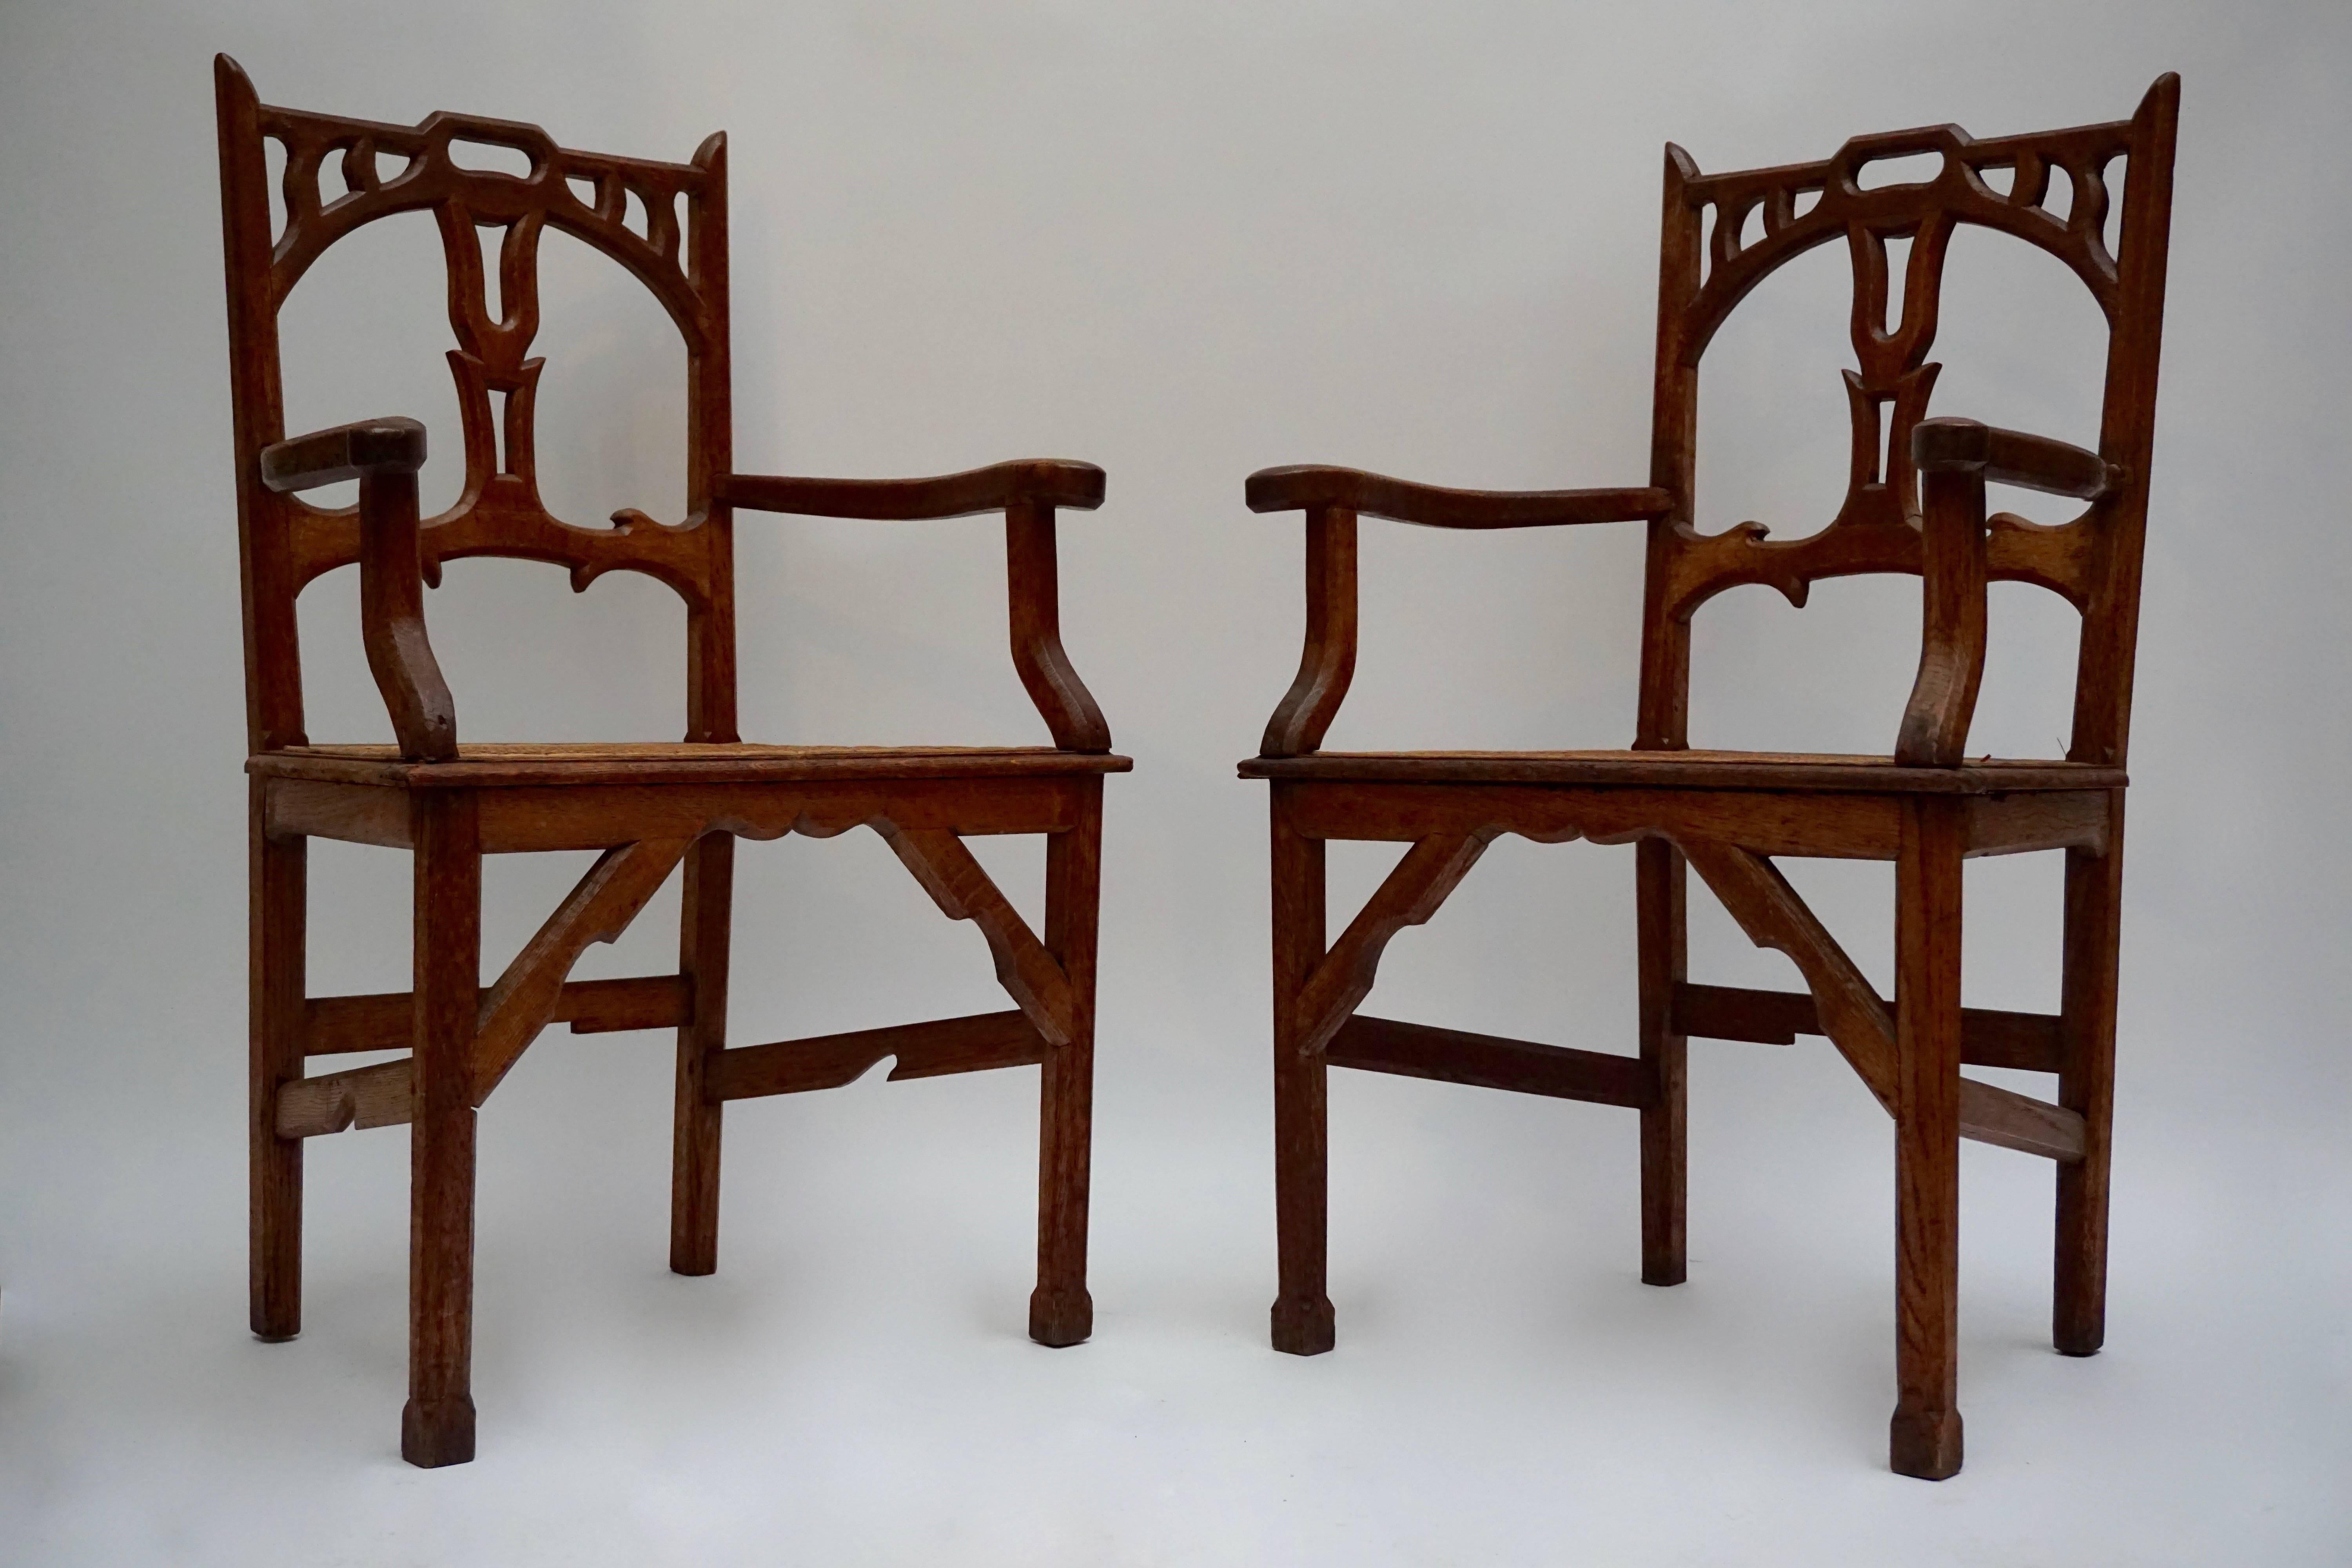 Pair of Art Nouveau carved teak armchairs with wicker woven seats.
 